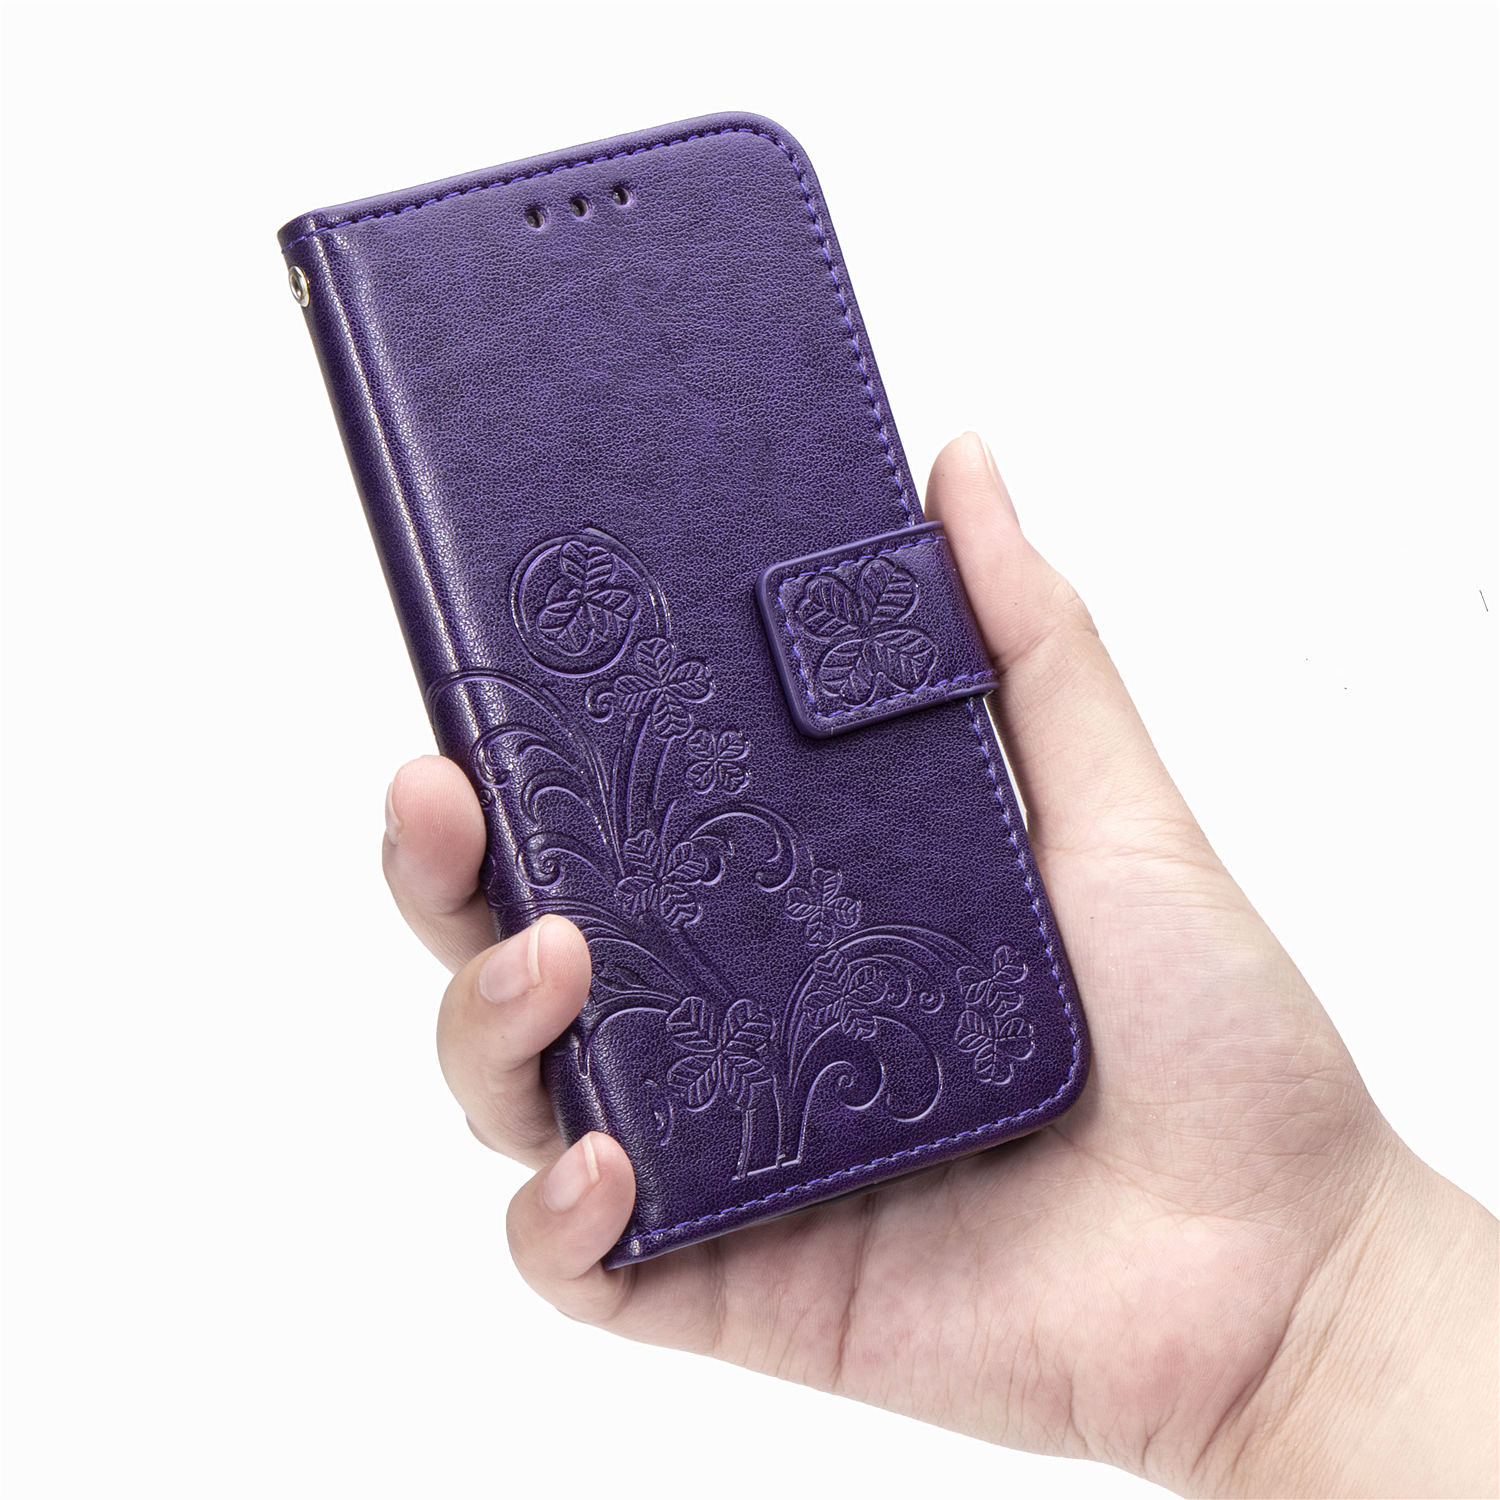 casing Xiaomi Mi MAX 3 Pocophone F1 8 lite redmi note 6 7 Pro PU Phone case four leaf clover flower Bumper Flip Leather Protective Support Cover Magnetic Wallet card slot blue pink gray purple red